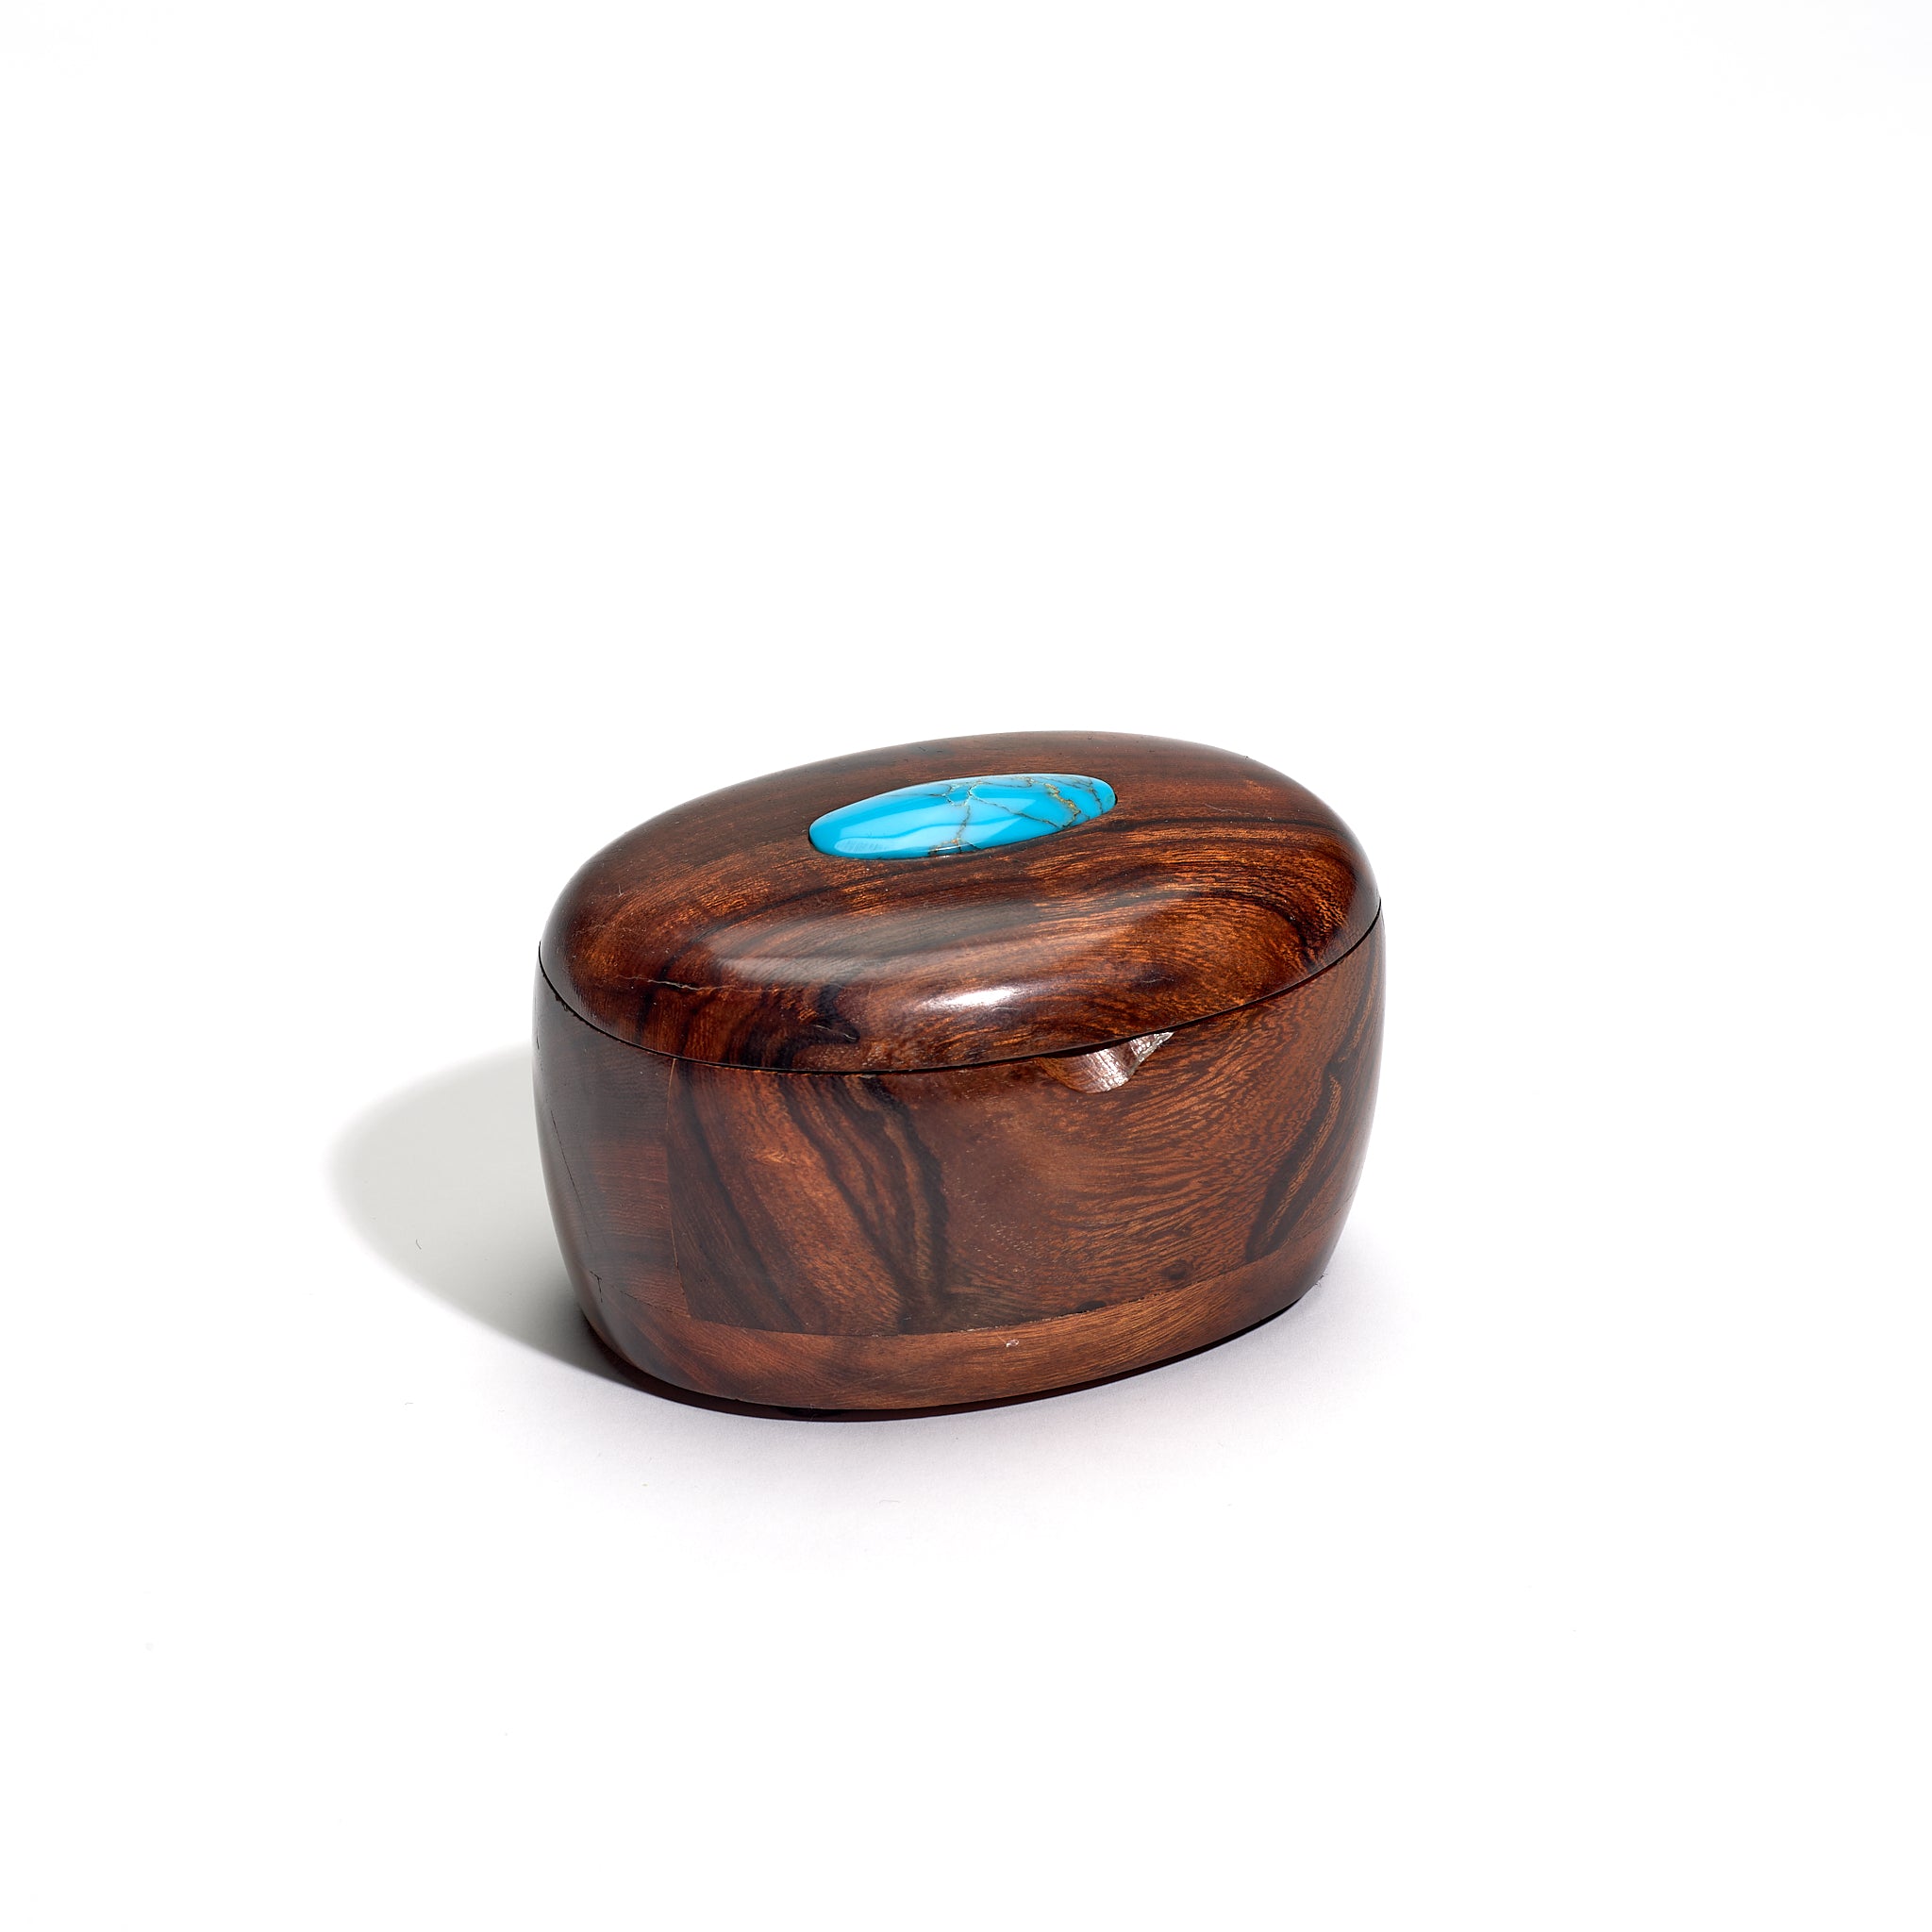 Ironwood Box with Turquoise Interior and Cabochon Lid